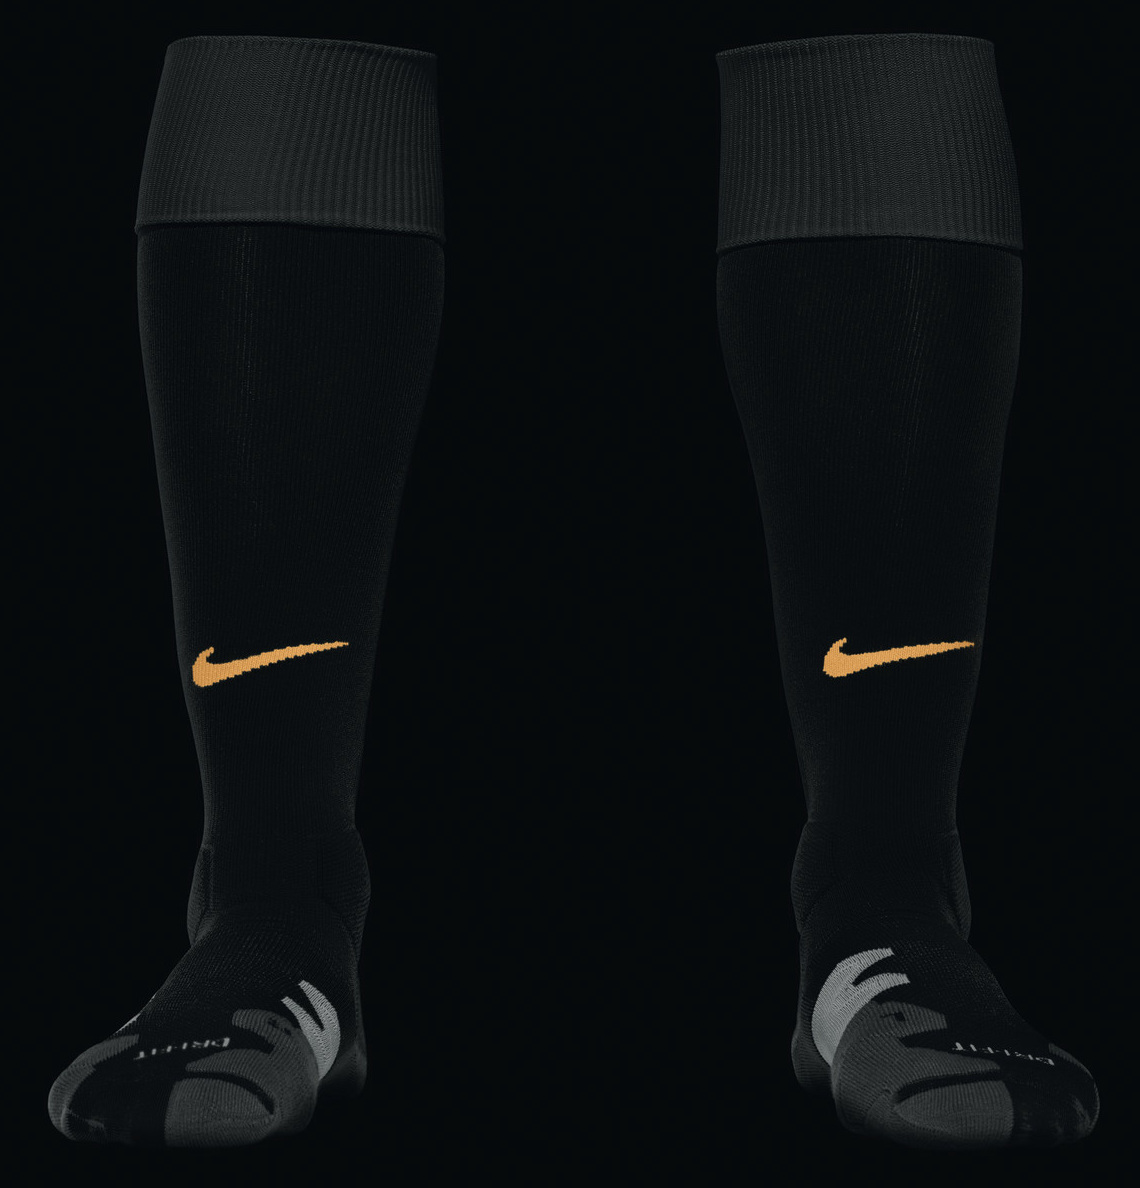 Nike Manchester City 13-14 (2013-14) Home and Away Kits Released, Third ...